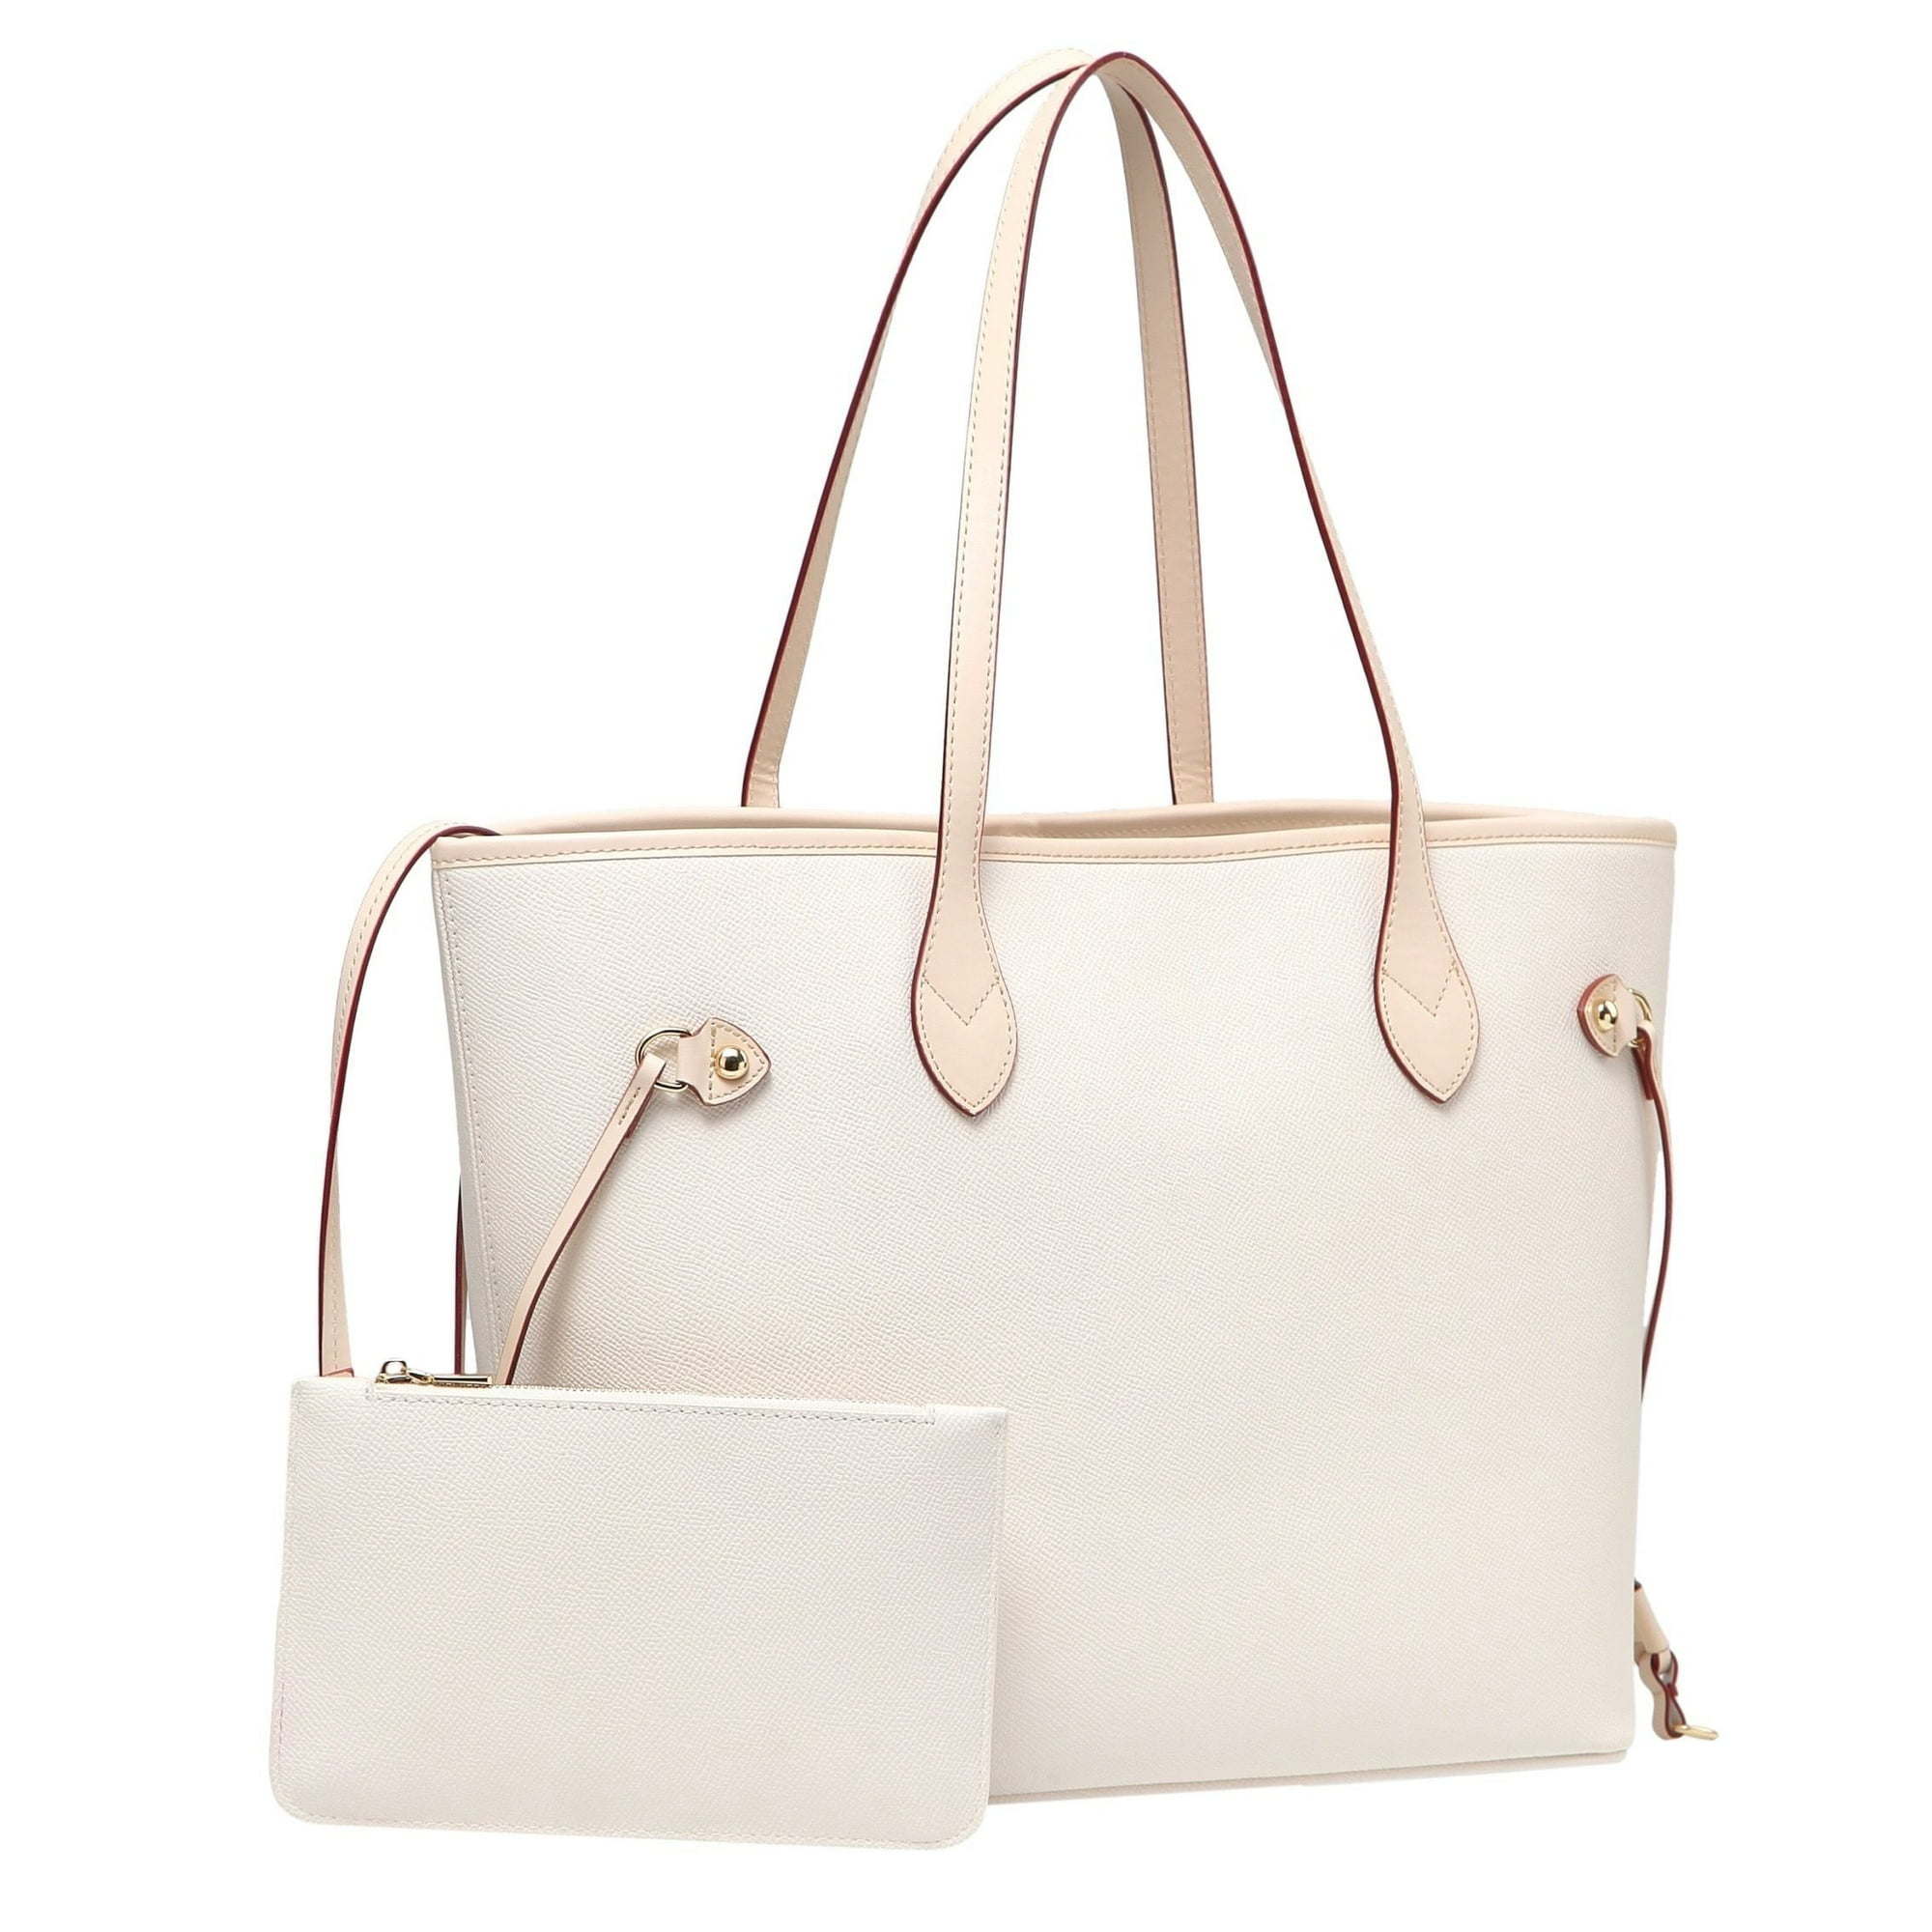 Daisy Rose Tote - $80 (20% Off Retail) - From Ranie